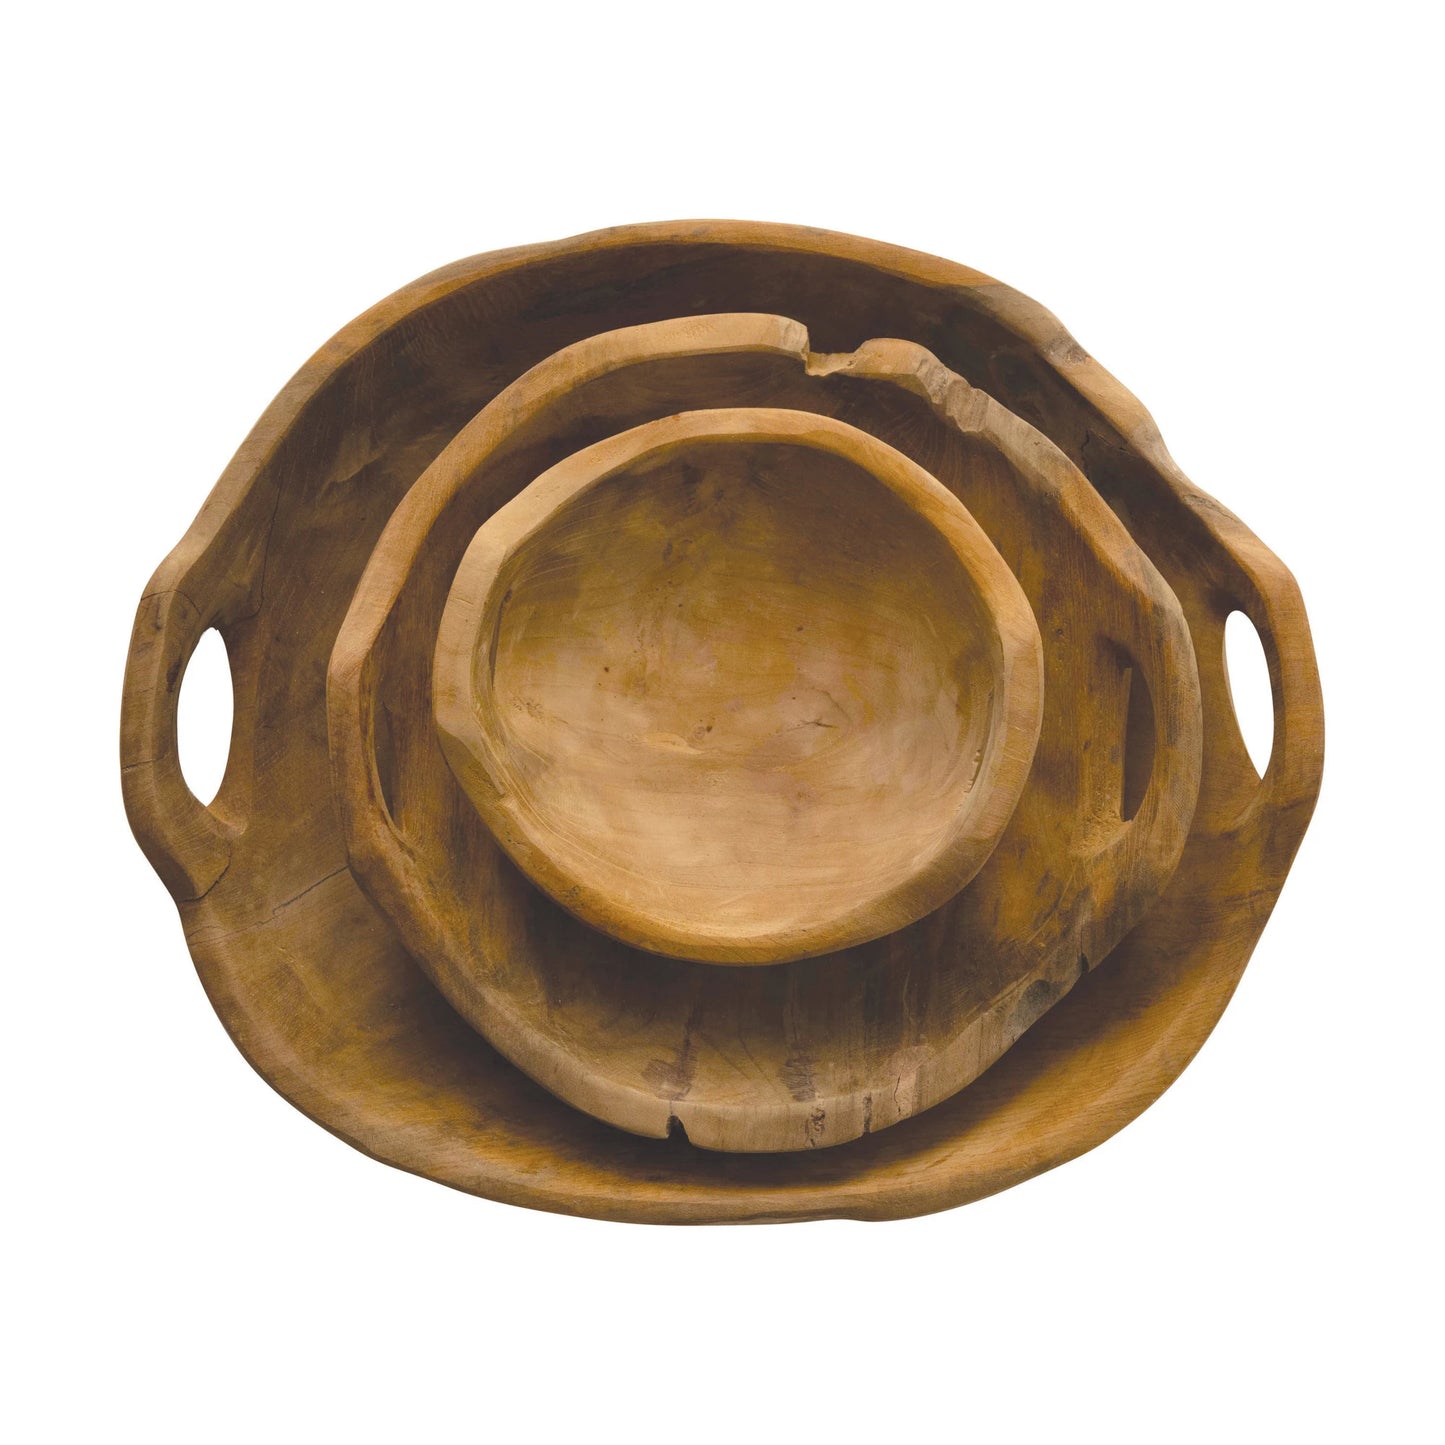 top view of the teak wood bowls with handles stacked on a white background